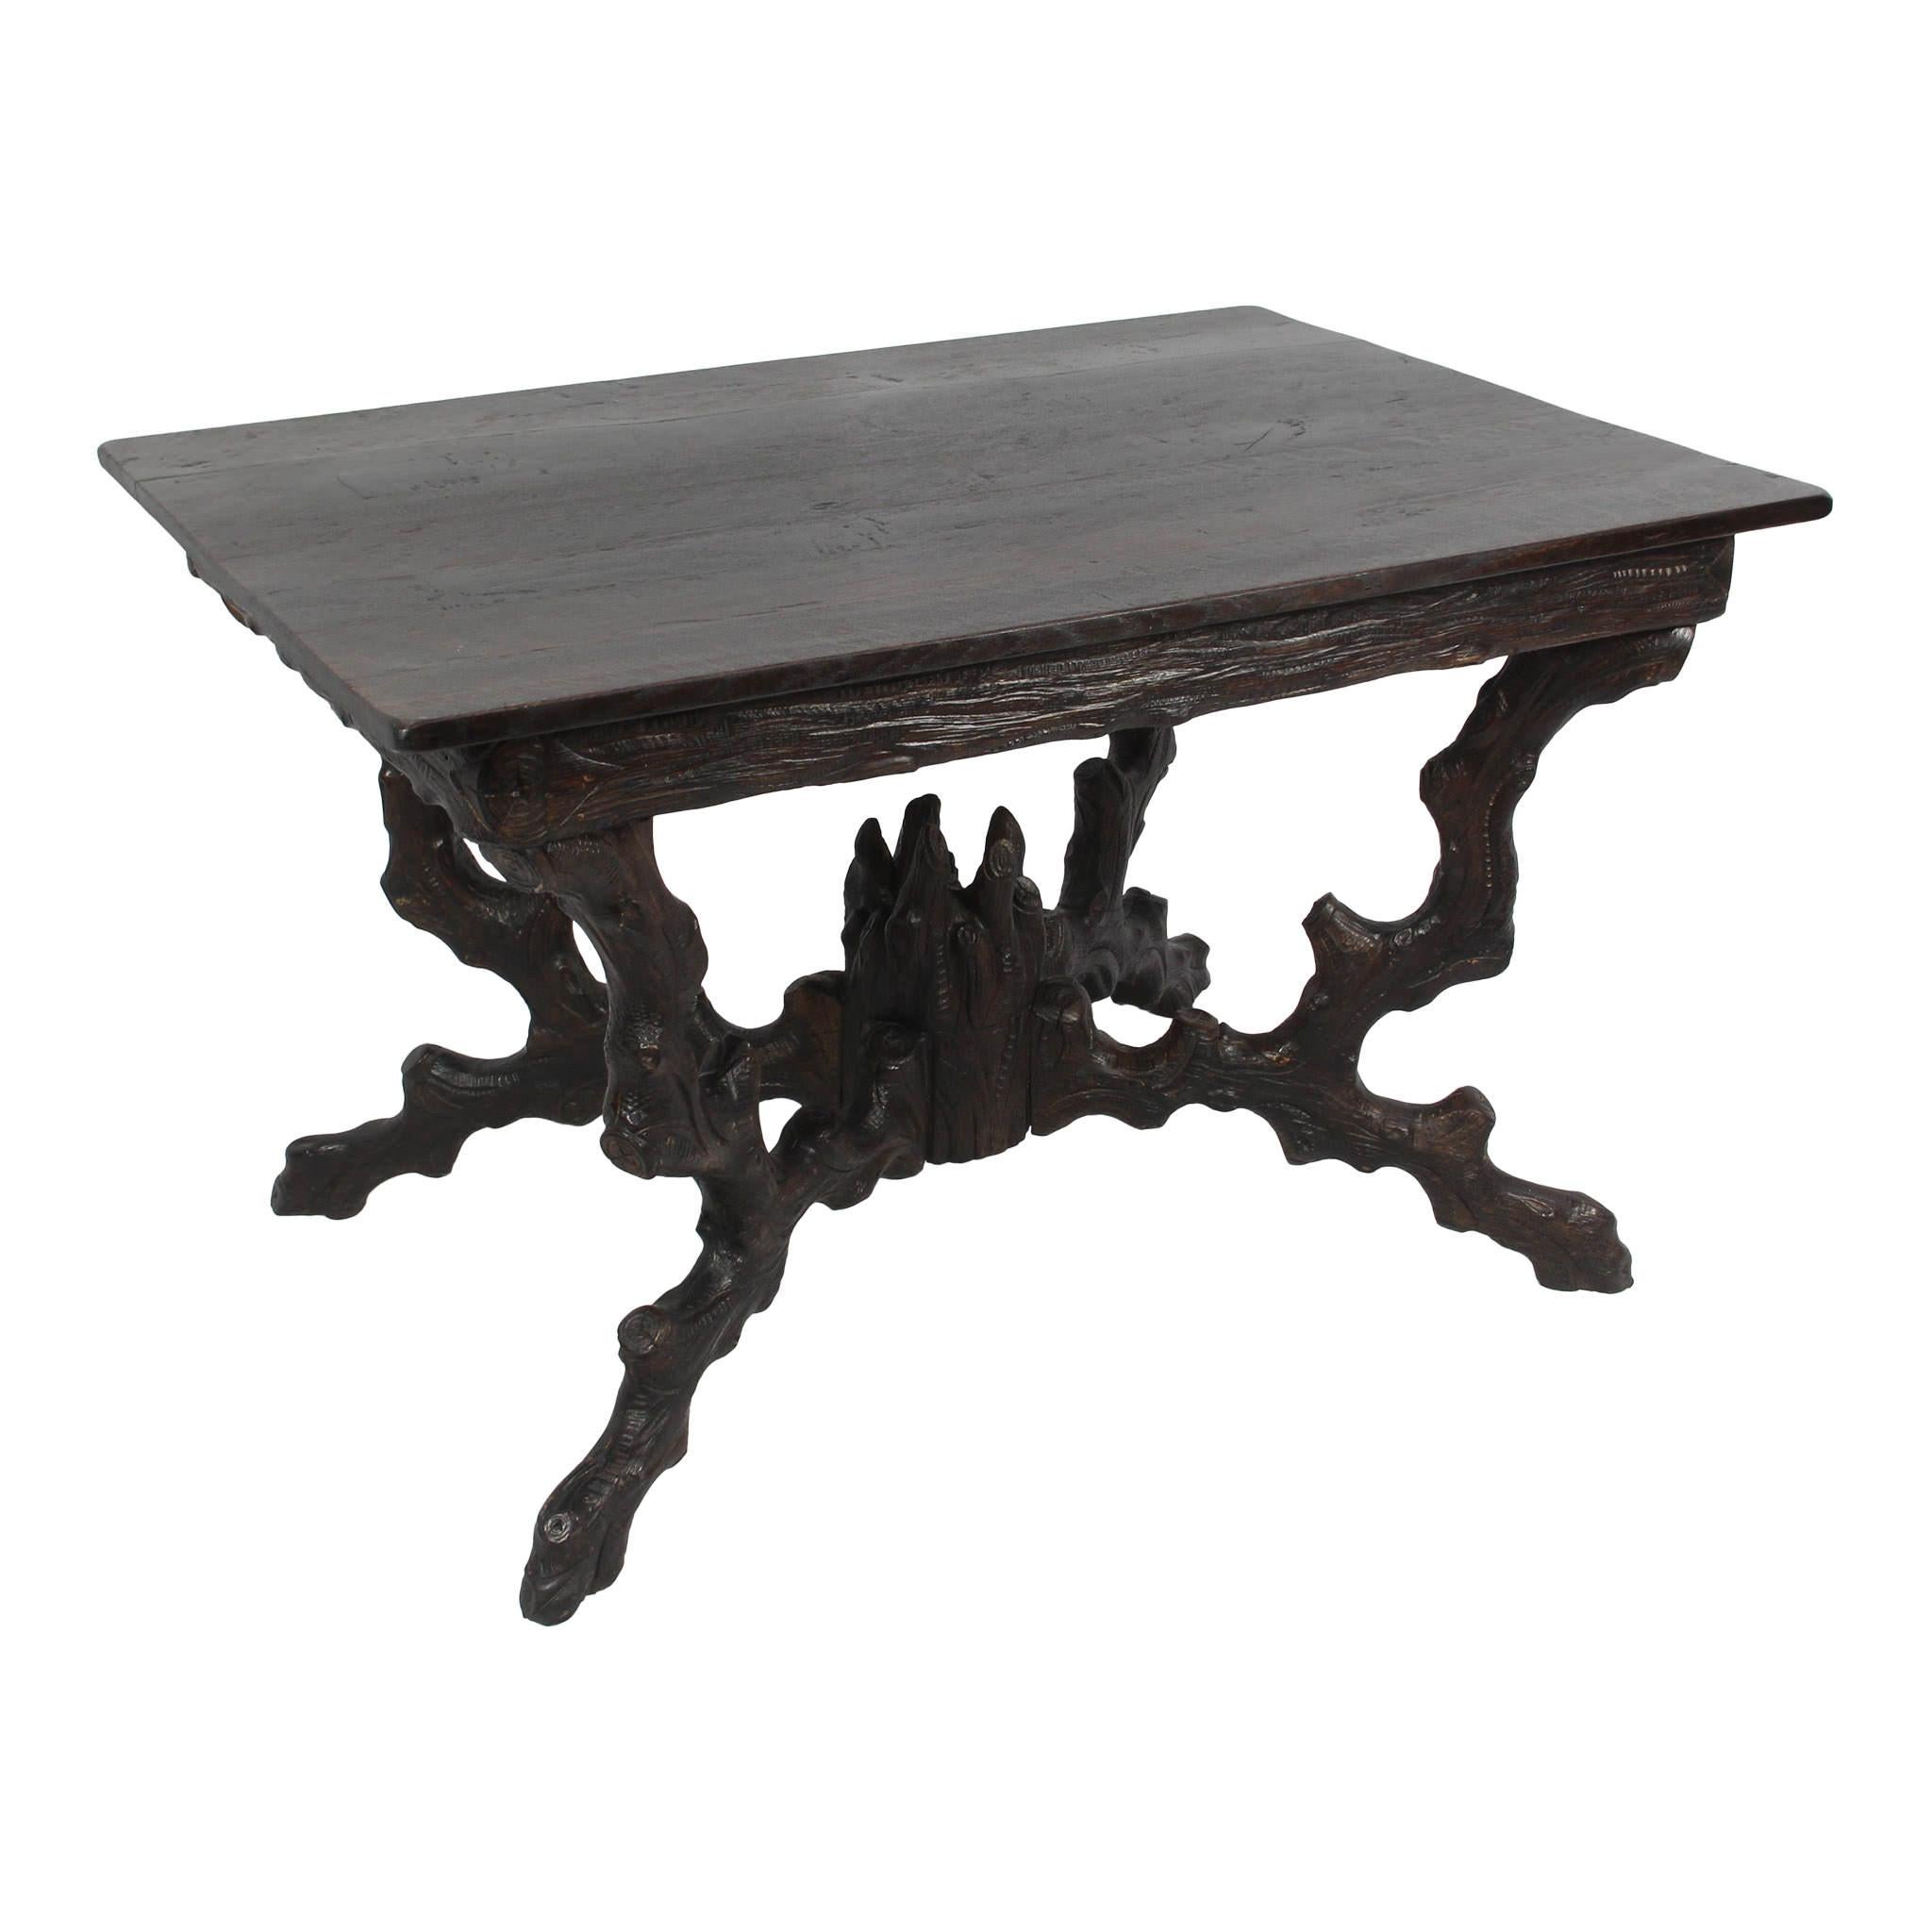 Carved to look like a tree with branches forming the legs and feet extending from a carved trunk, this rectangular table features a rich, dark stain. The chairs show striking contrast both in color and material. The cream color, velvet upholstery of